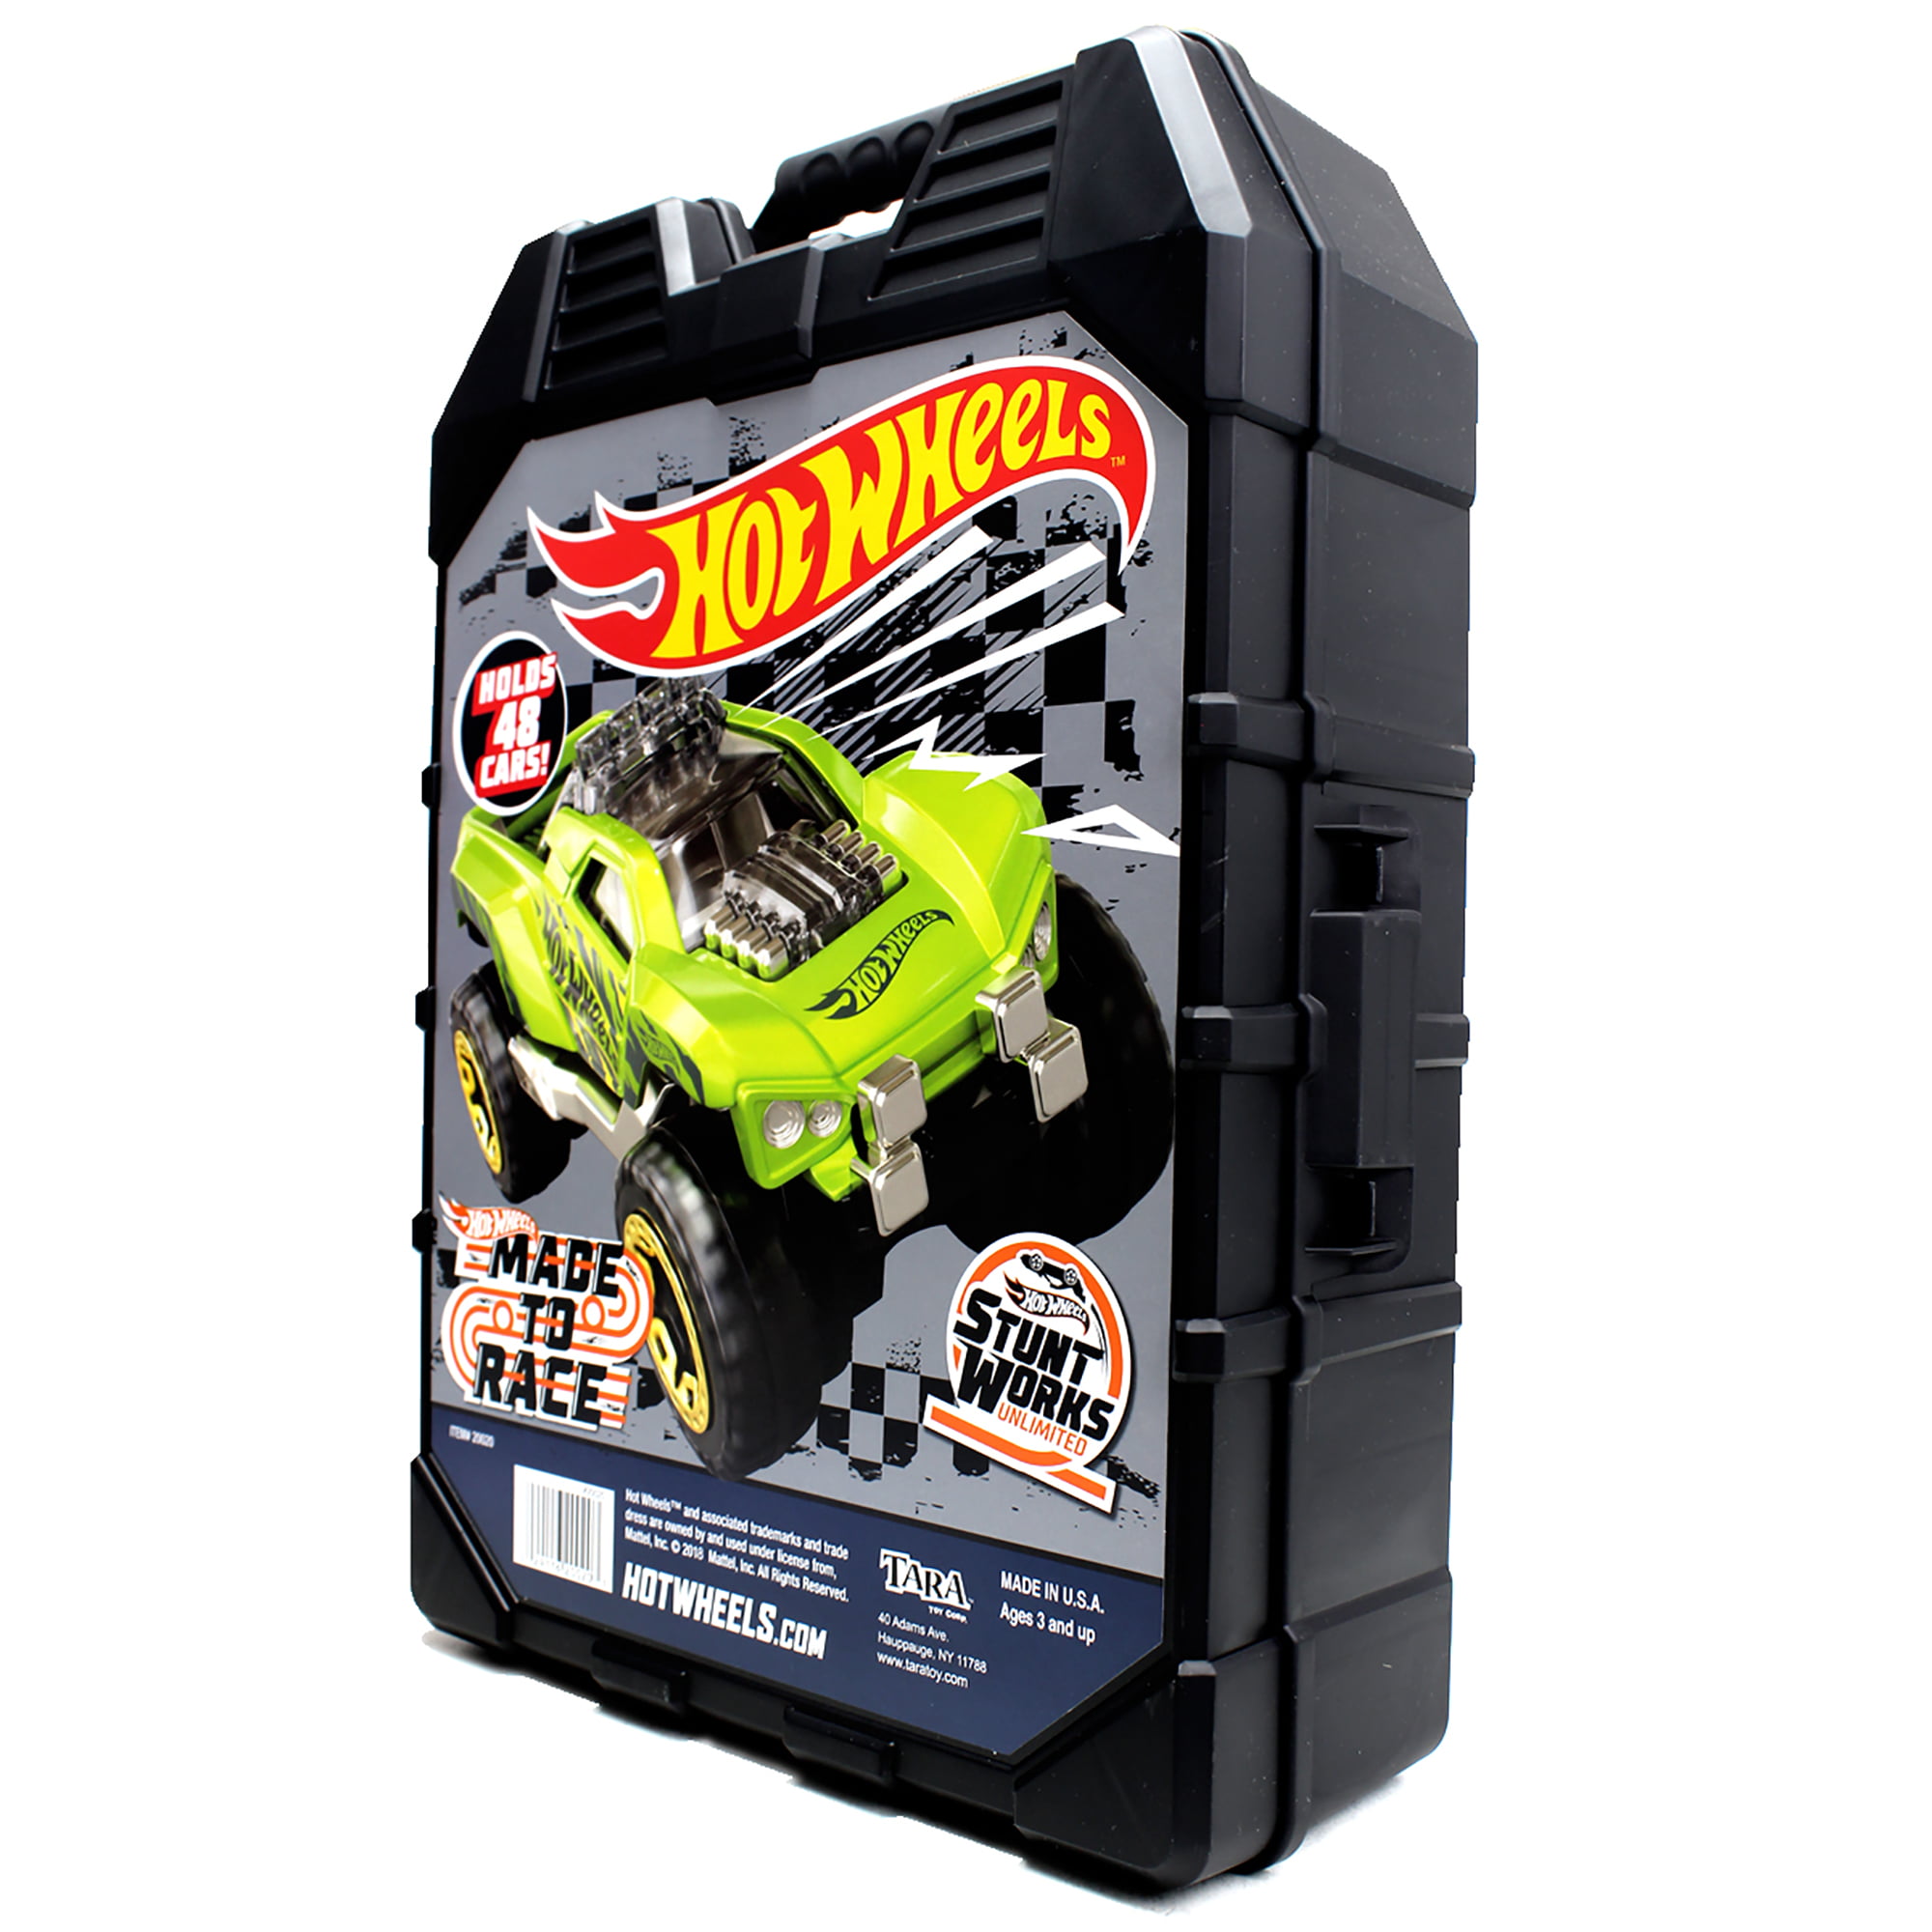 DUAL-SIDED HOT WHEELS DIE-CAST CARRYING CASE STORAGE BOX HOLDS 48 VEHICLES 